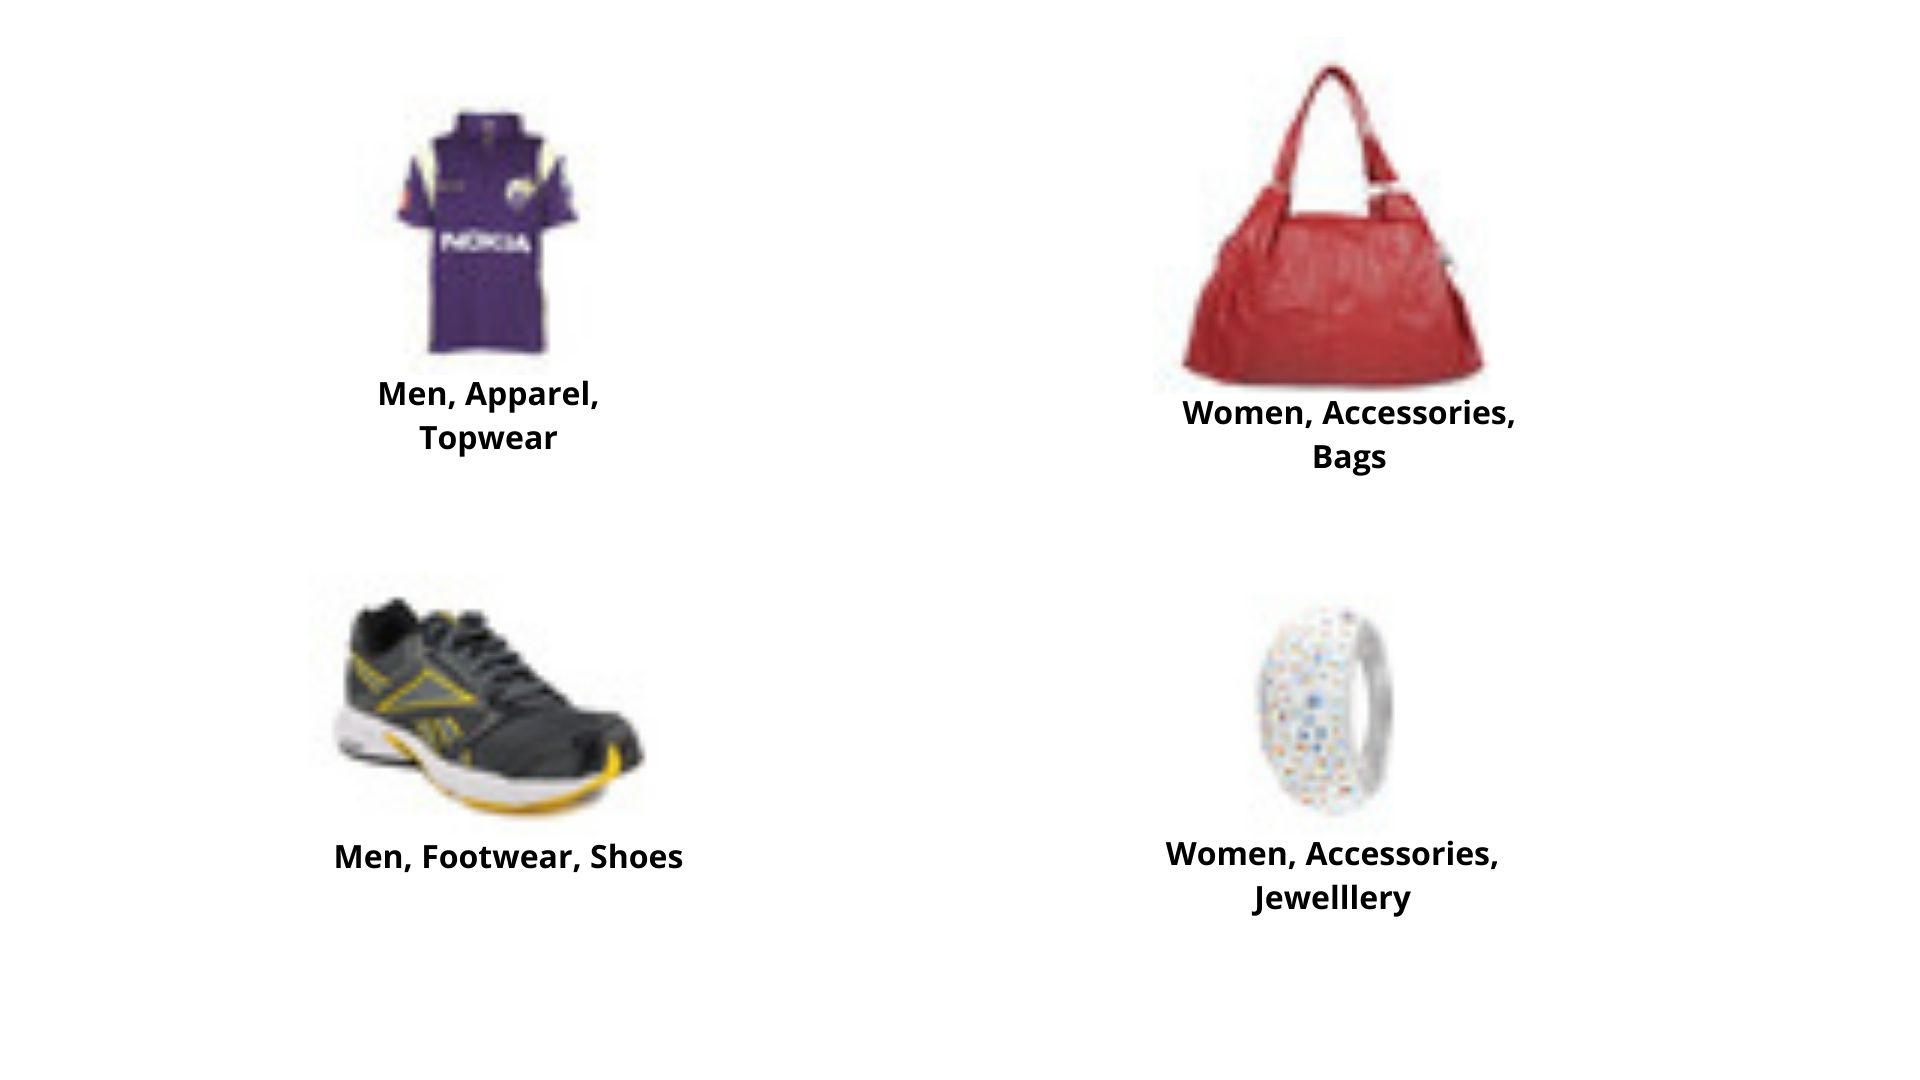 Fashion item images with their categories.